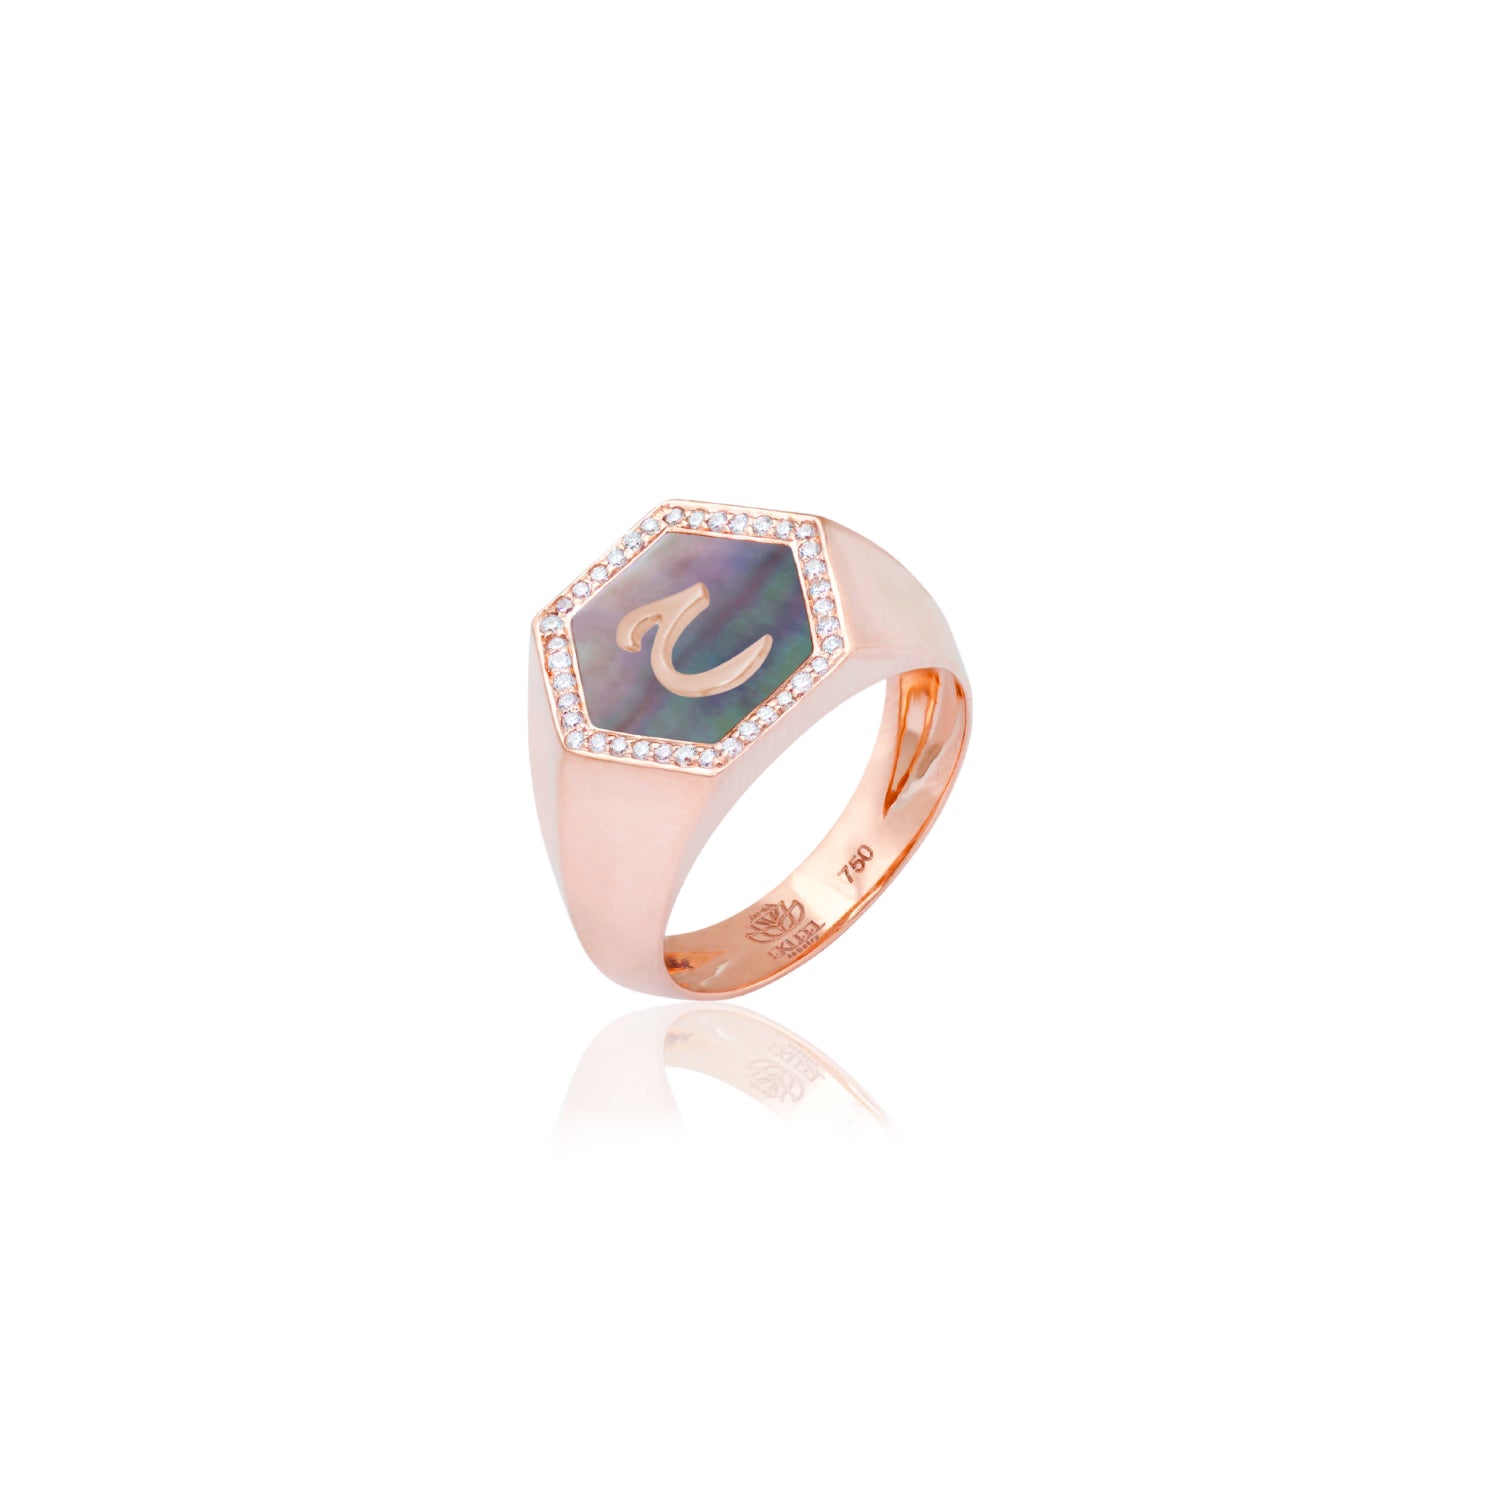 Qamoos 2.0 Letter ح Black Mother of Pearl and Diamond Signet Ring in Rose Gold